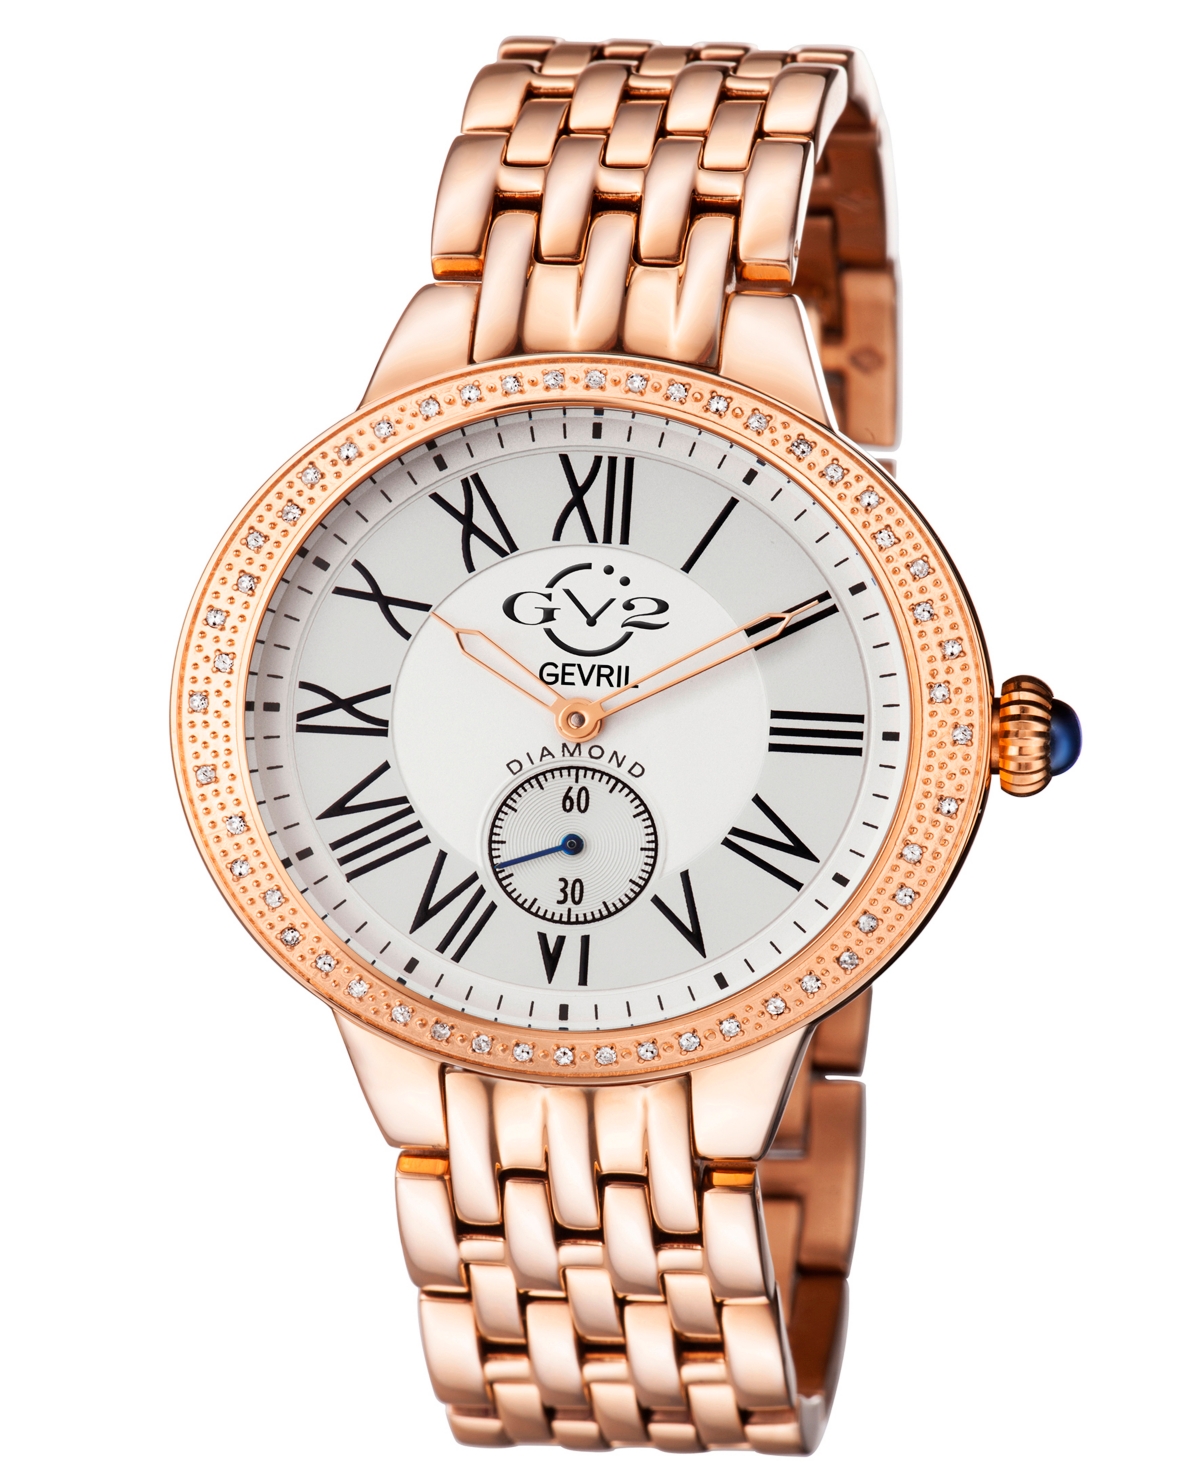 Gv2 By Gevril Women's Astor Rose Gold-tone Stainless Steel Watch 40mm